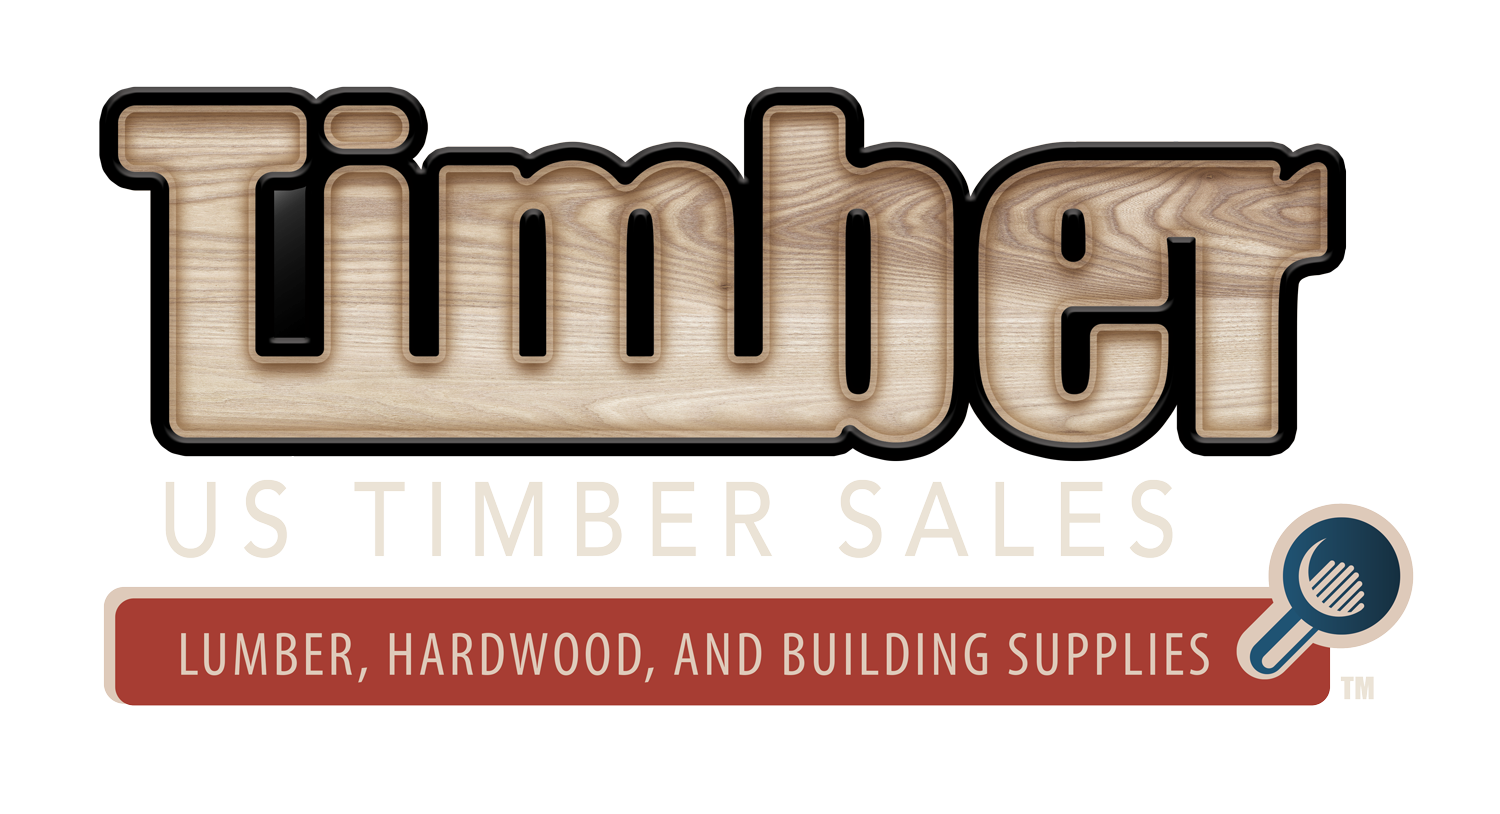 US Timber Sales full color logo